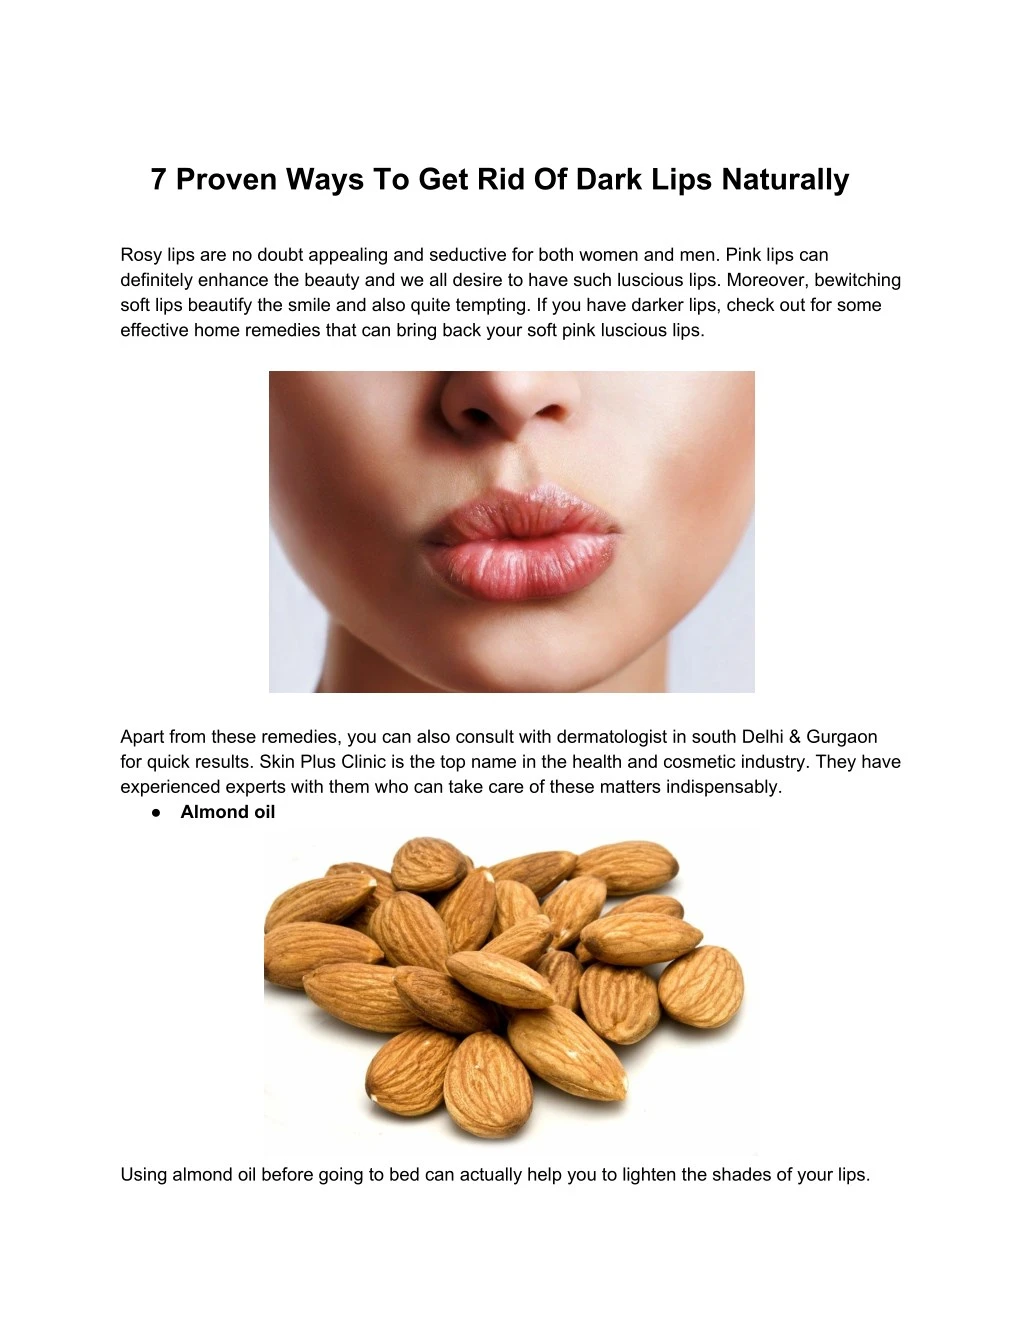 7 proven ways to get rid of dark lips naturally